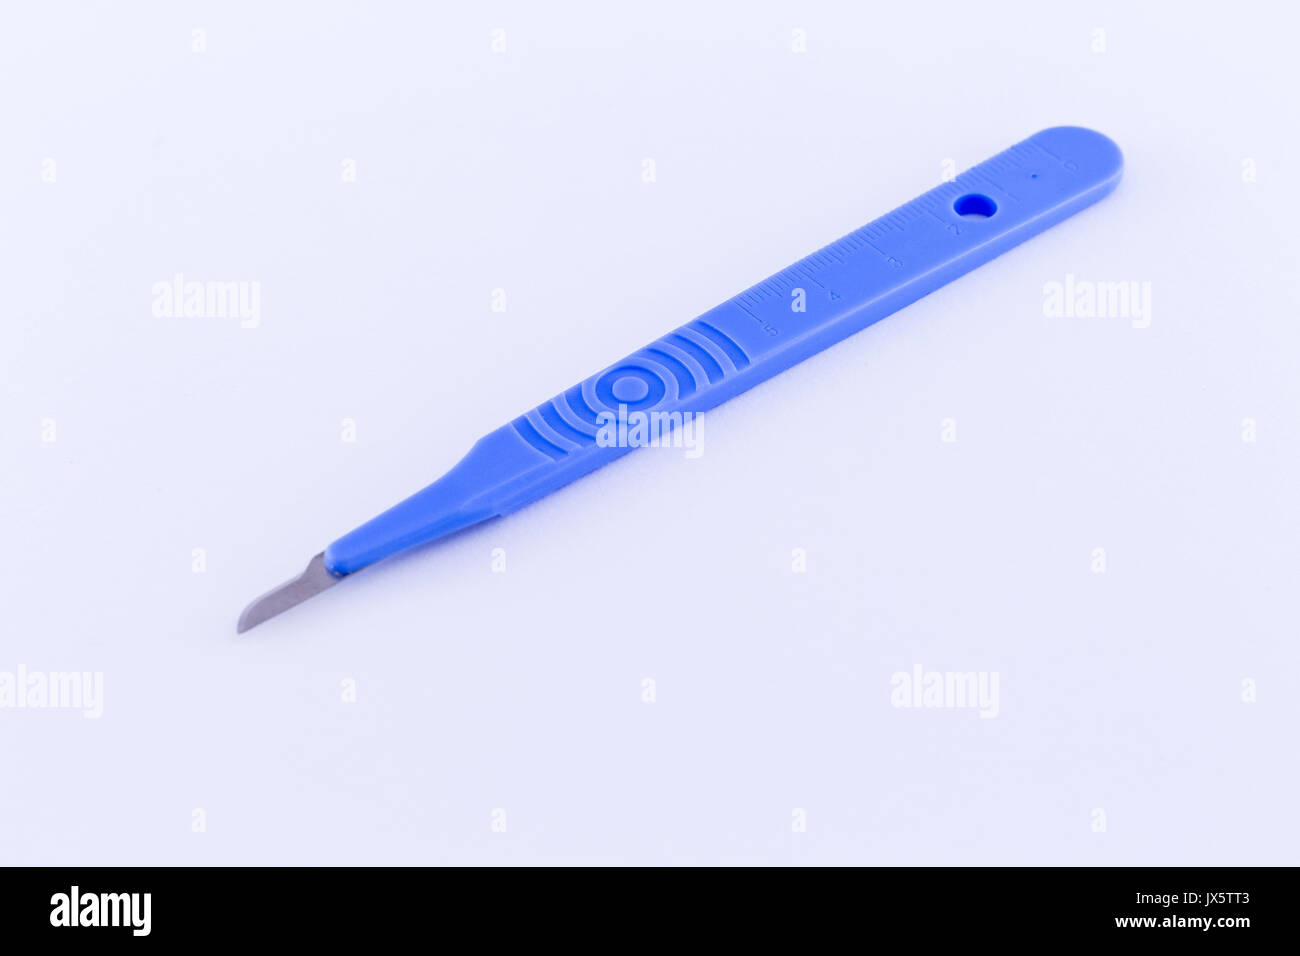 surgeon scalpel for medical use cutting Stock Photo